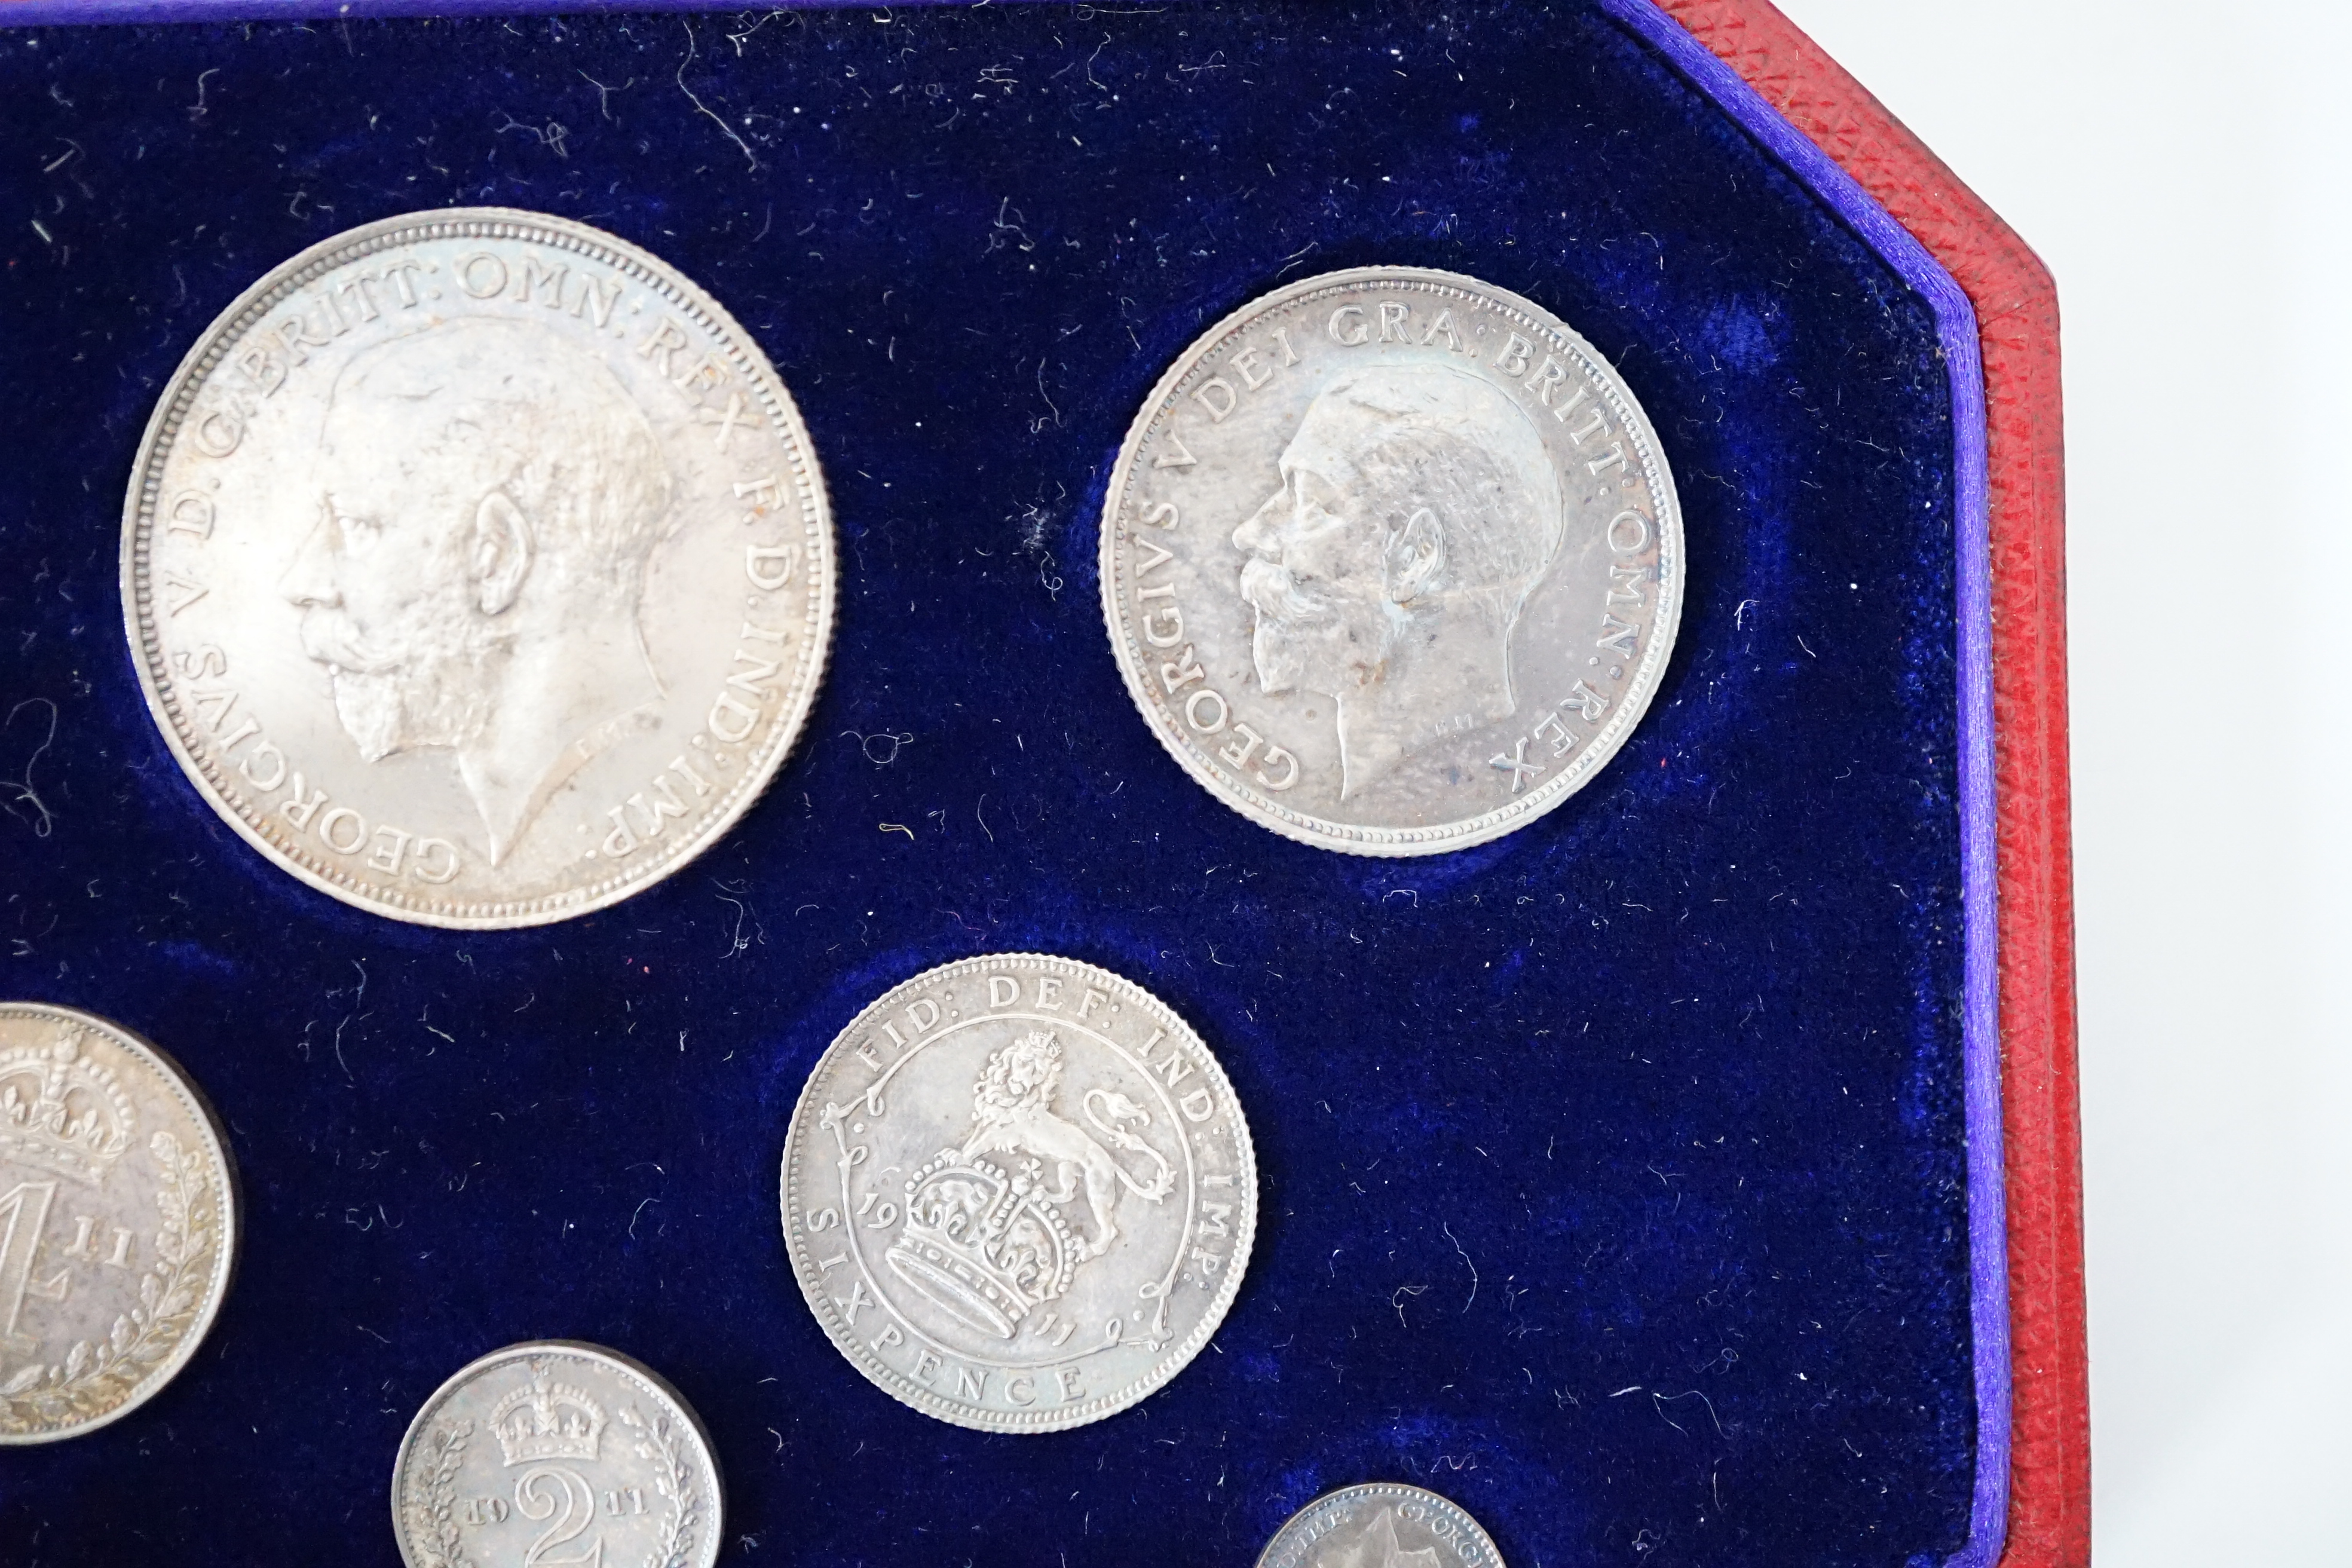 British Silver Coins, George V coronation specimen eight coin set, 1911, ranging from halfcrown to maundy penny, in case of issue